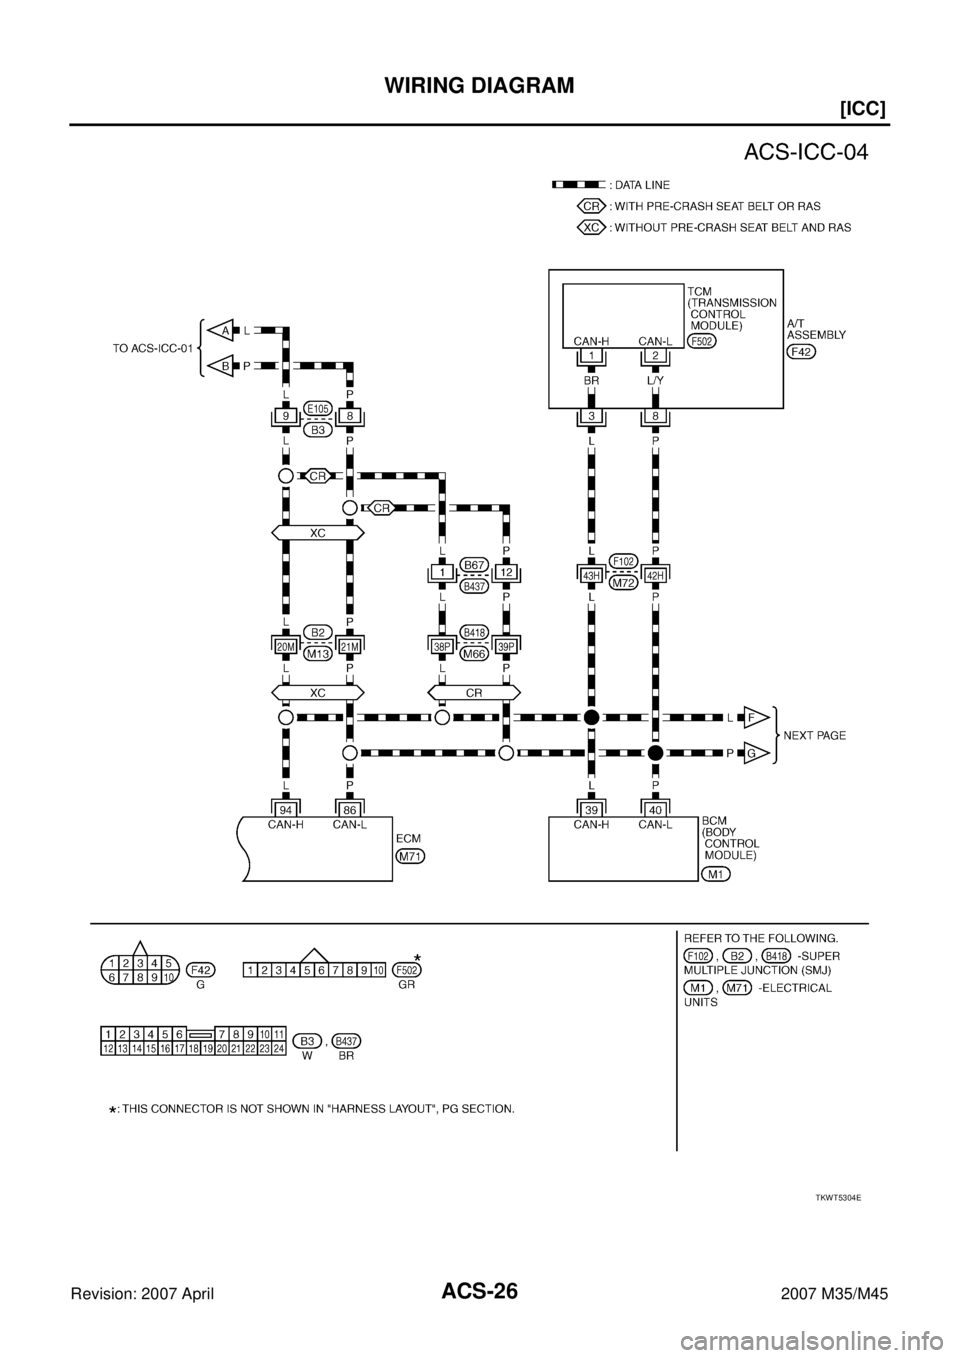 INFINITI M35 2007  Factory Owners Guide ACS-26
[ICC]
WIRING DIAGRAM
Revision: 2007 April2007 M35/M45
TKWT5304E 